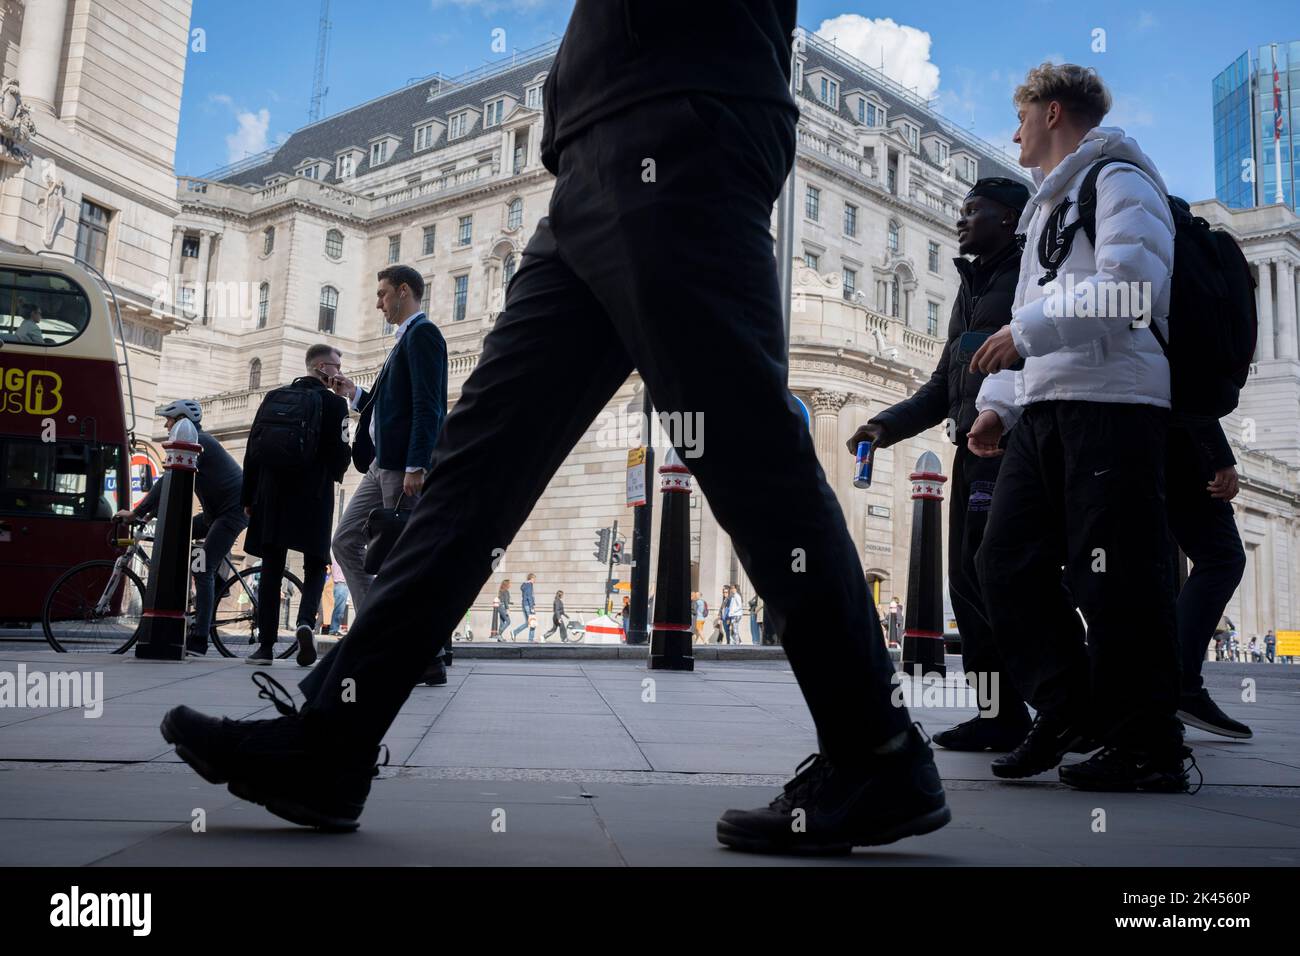 Londoners walk past the Bank of England during  Prime Minister Liz Truss and her Chancellor Kwasi Kwarteng's economic crisis, in the City of London, the capital's financial district, on 29th September 2022, in the City of London, England. Stock Photo